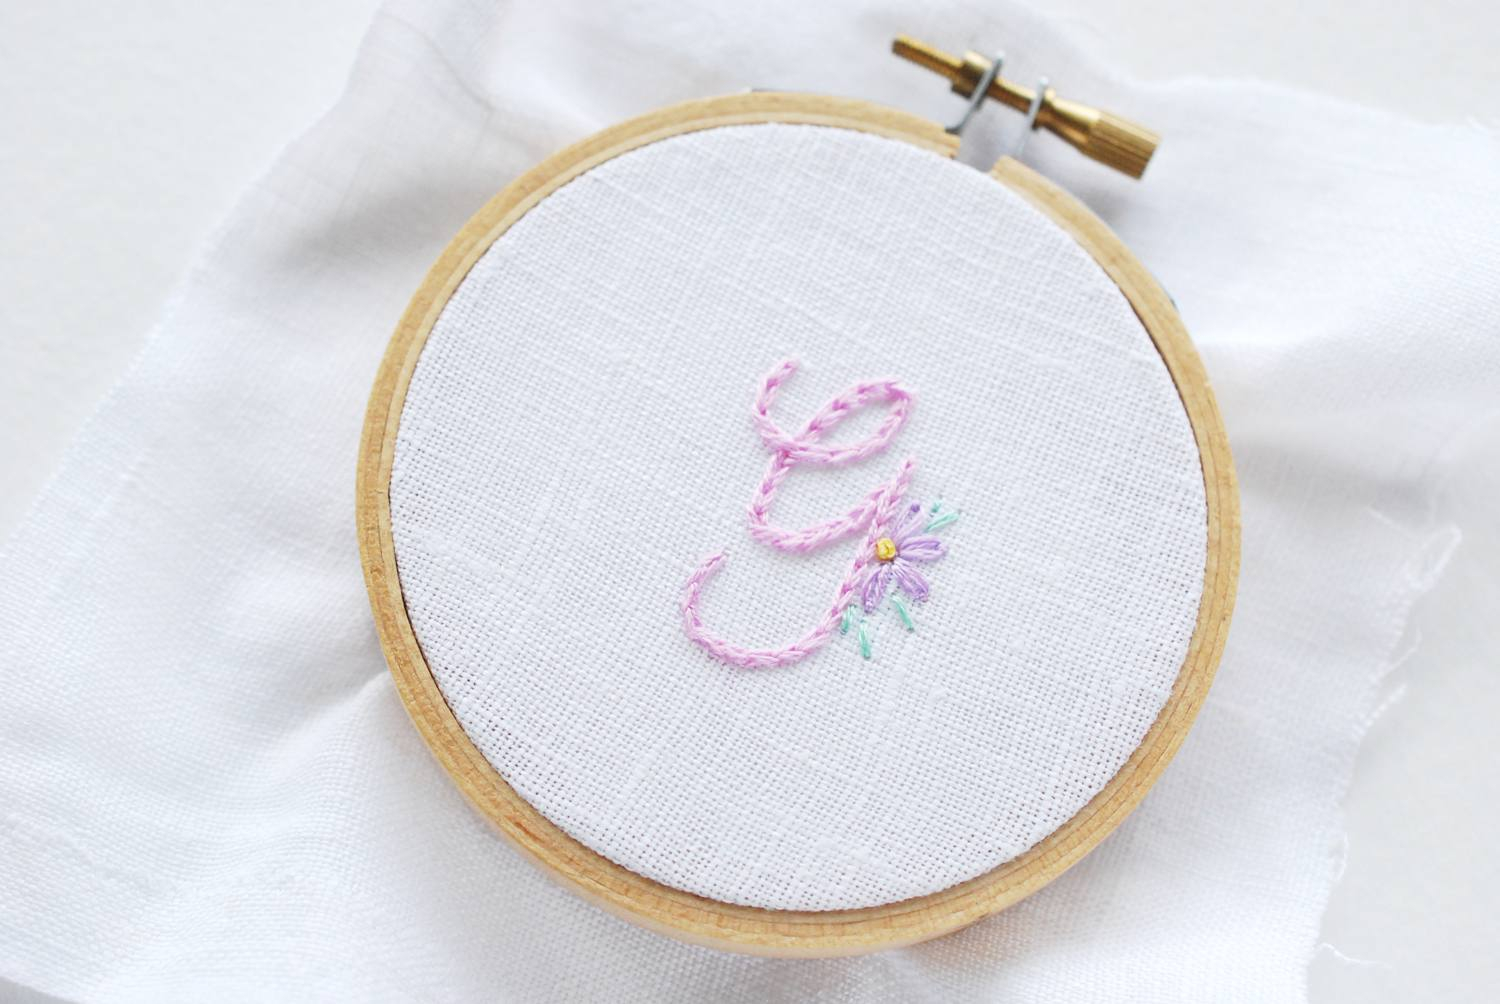 Monogram Patterns For Embroidery Free Alphabet Pattern For Monogram Embroidery